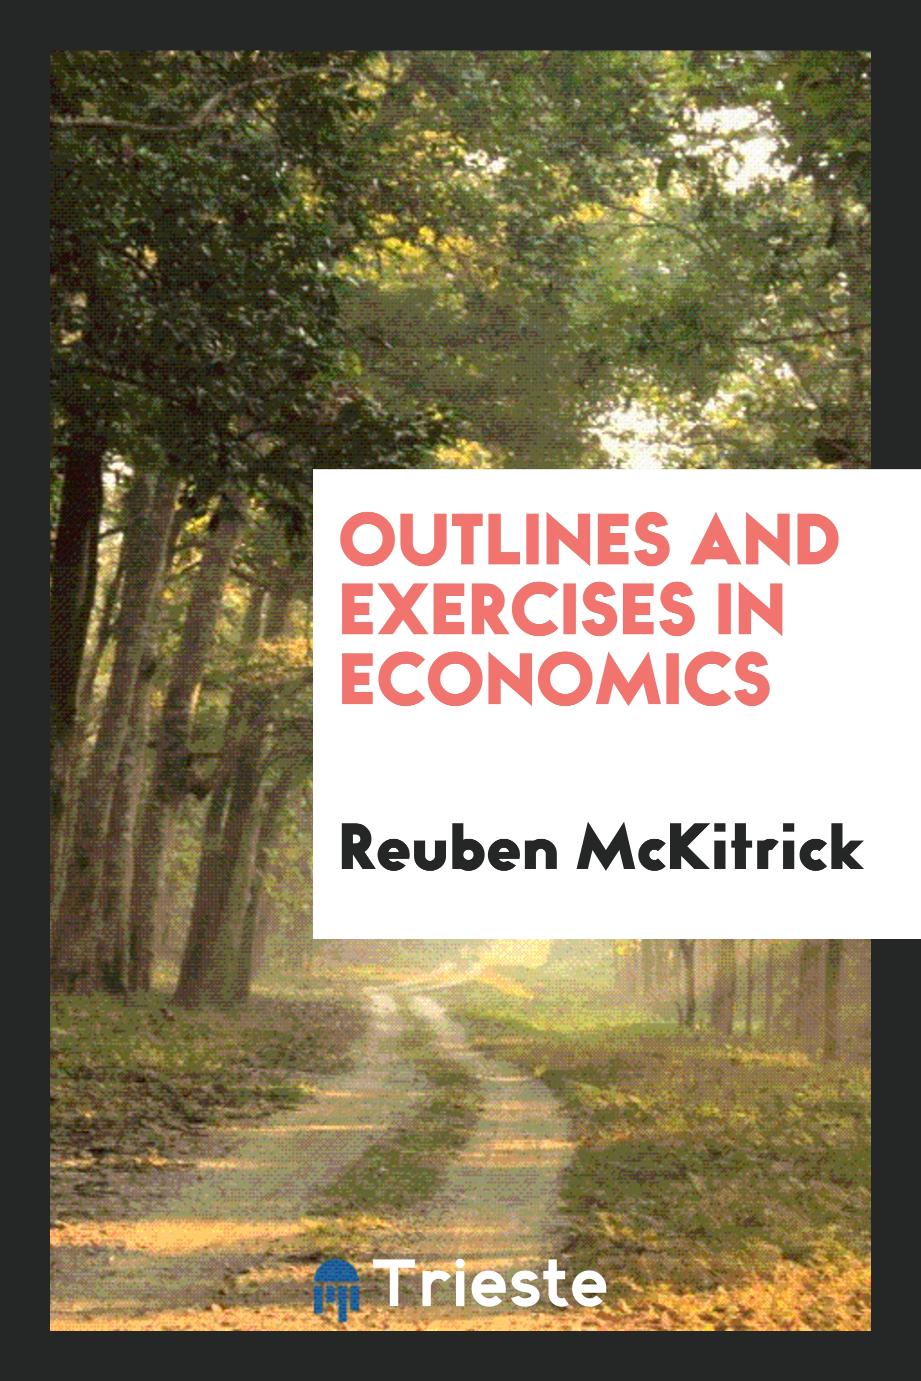 Outlines and exercises in economics